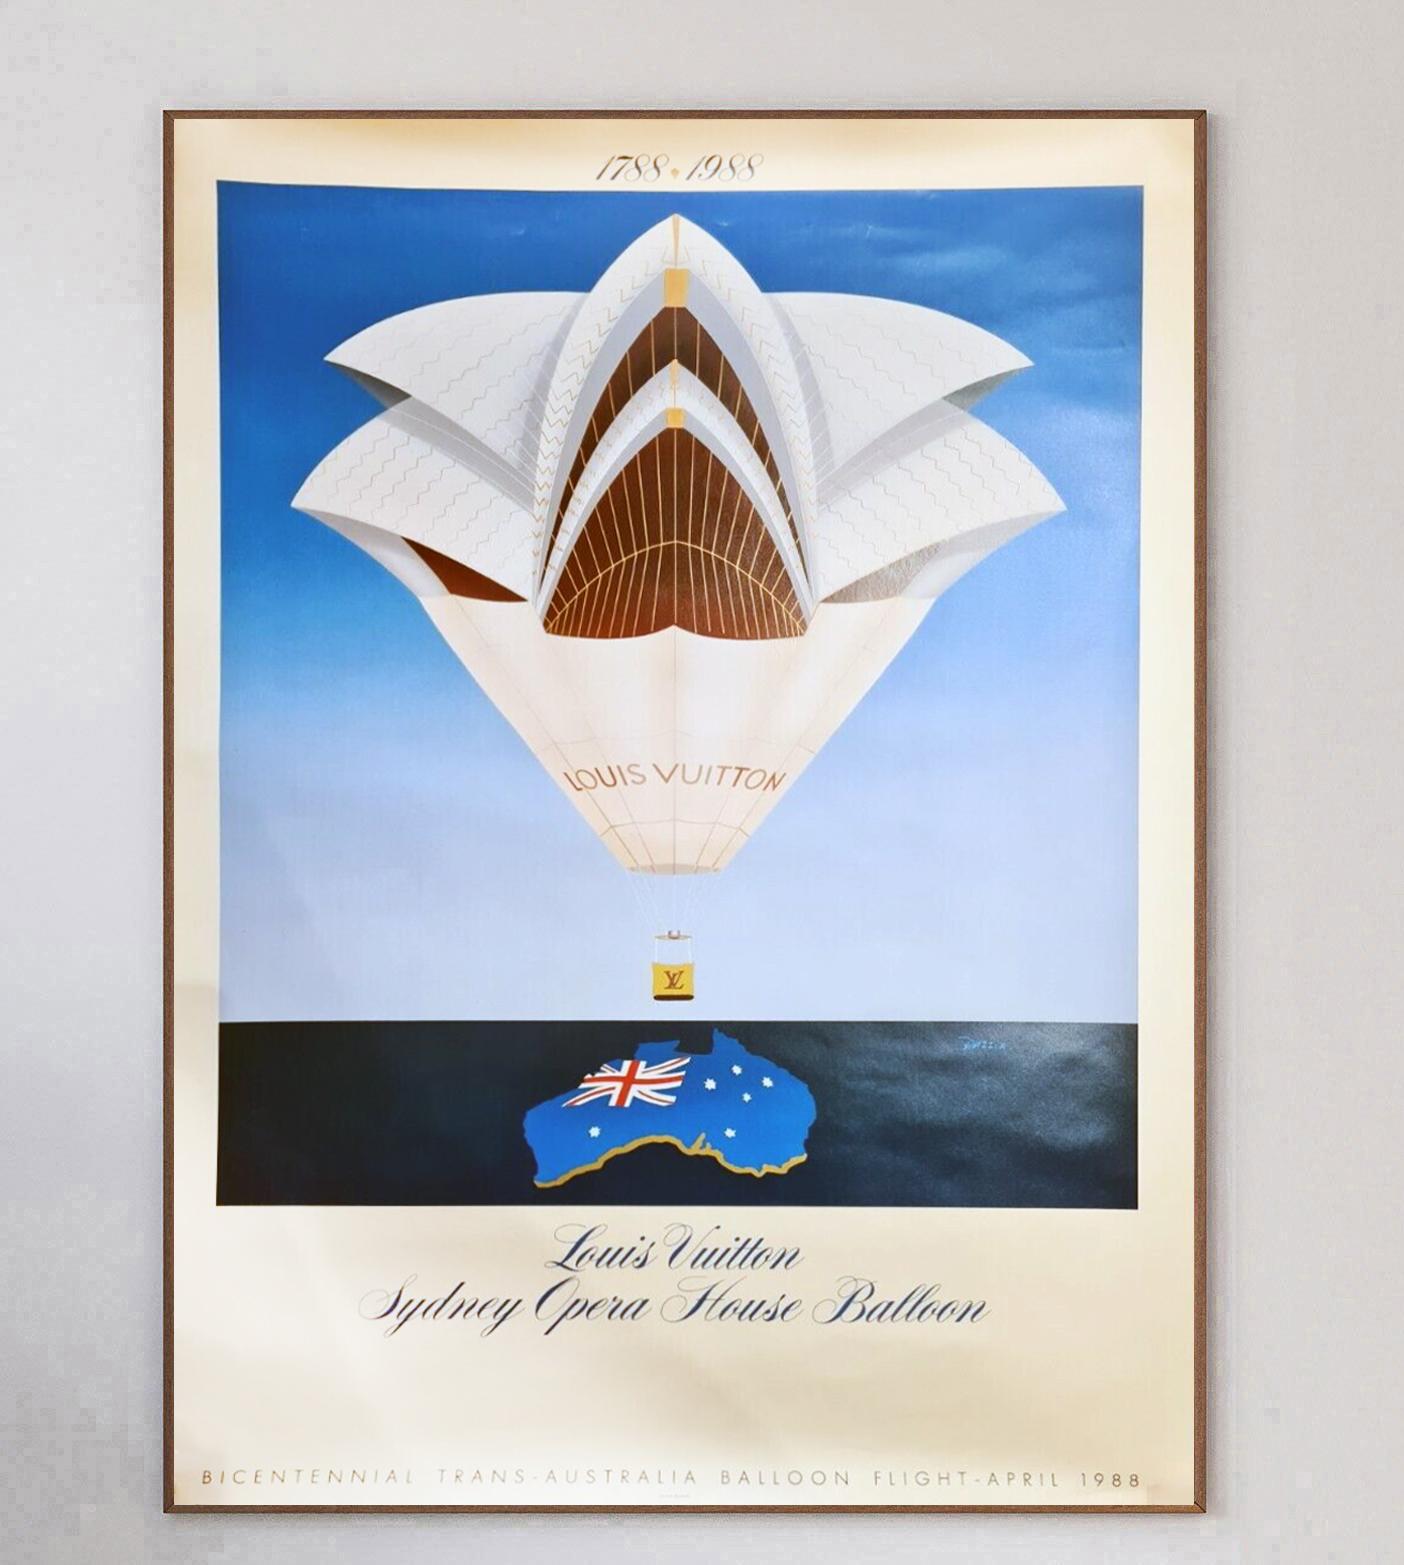 Depicting a gorgeous art deco scene of The Louis Vuitton Sydney Opera House Balloon, a hot air balloon styled as the iconic Sydney Opera House, this poster was created in 1988 for the Bicentennial Trans-Australia Balloon Flight in April 1988.